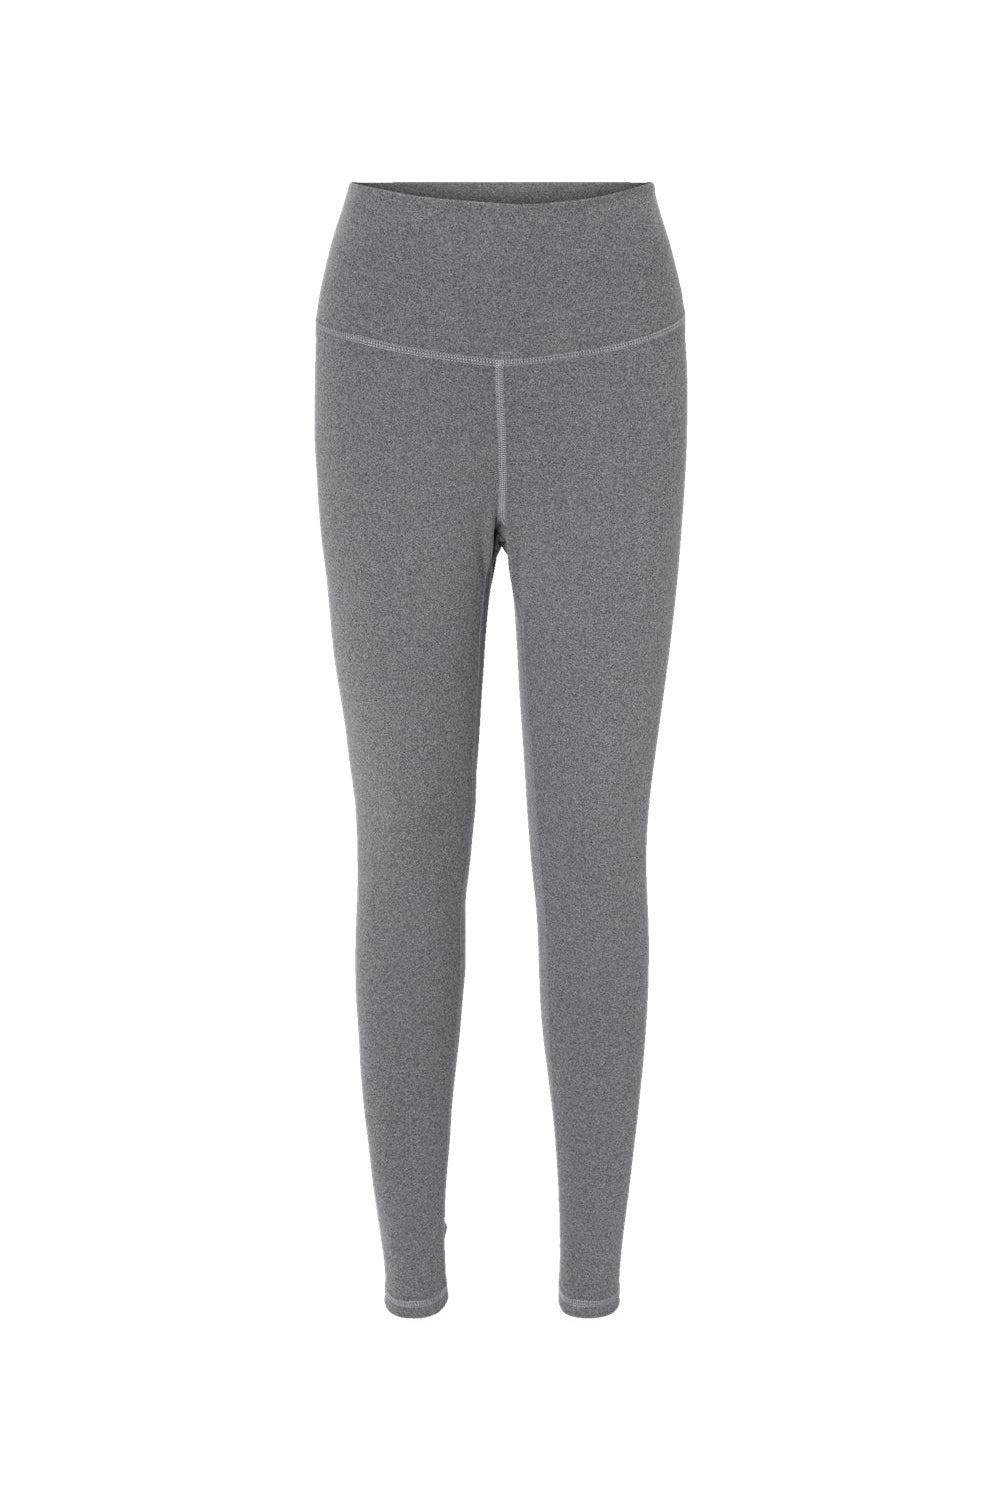 Champion CHP120 Womens Sport Soft Touch Leggings w/ Pocket Heather Grey Flat Front